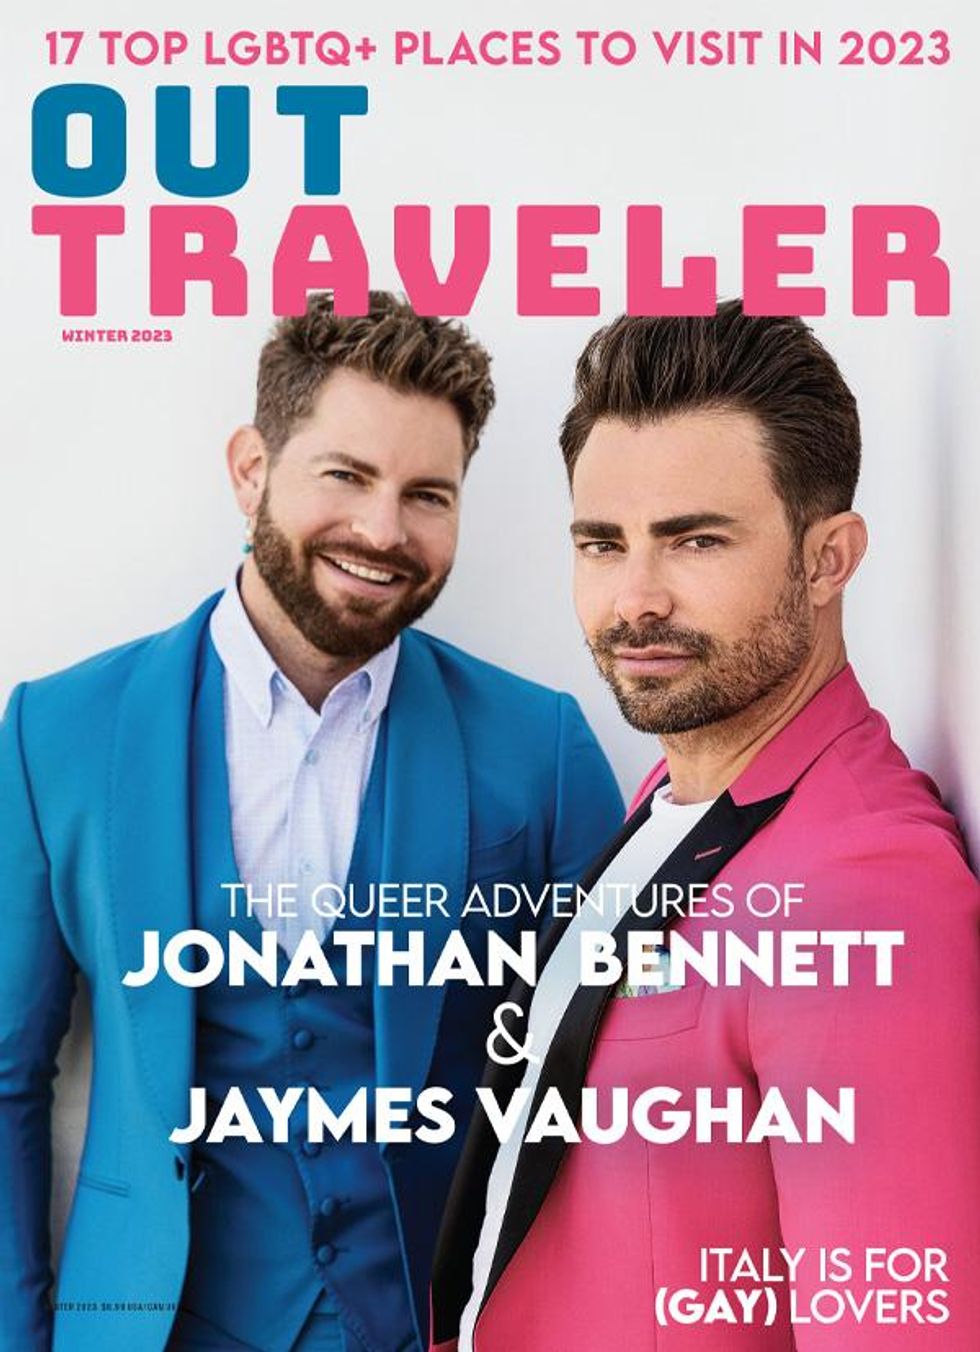 Jonathan Bennett in pink suit and Jaymes Vaughan in blue suit on the cover of Out Traveler Winter 2023.